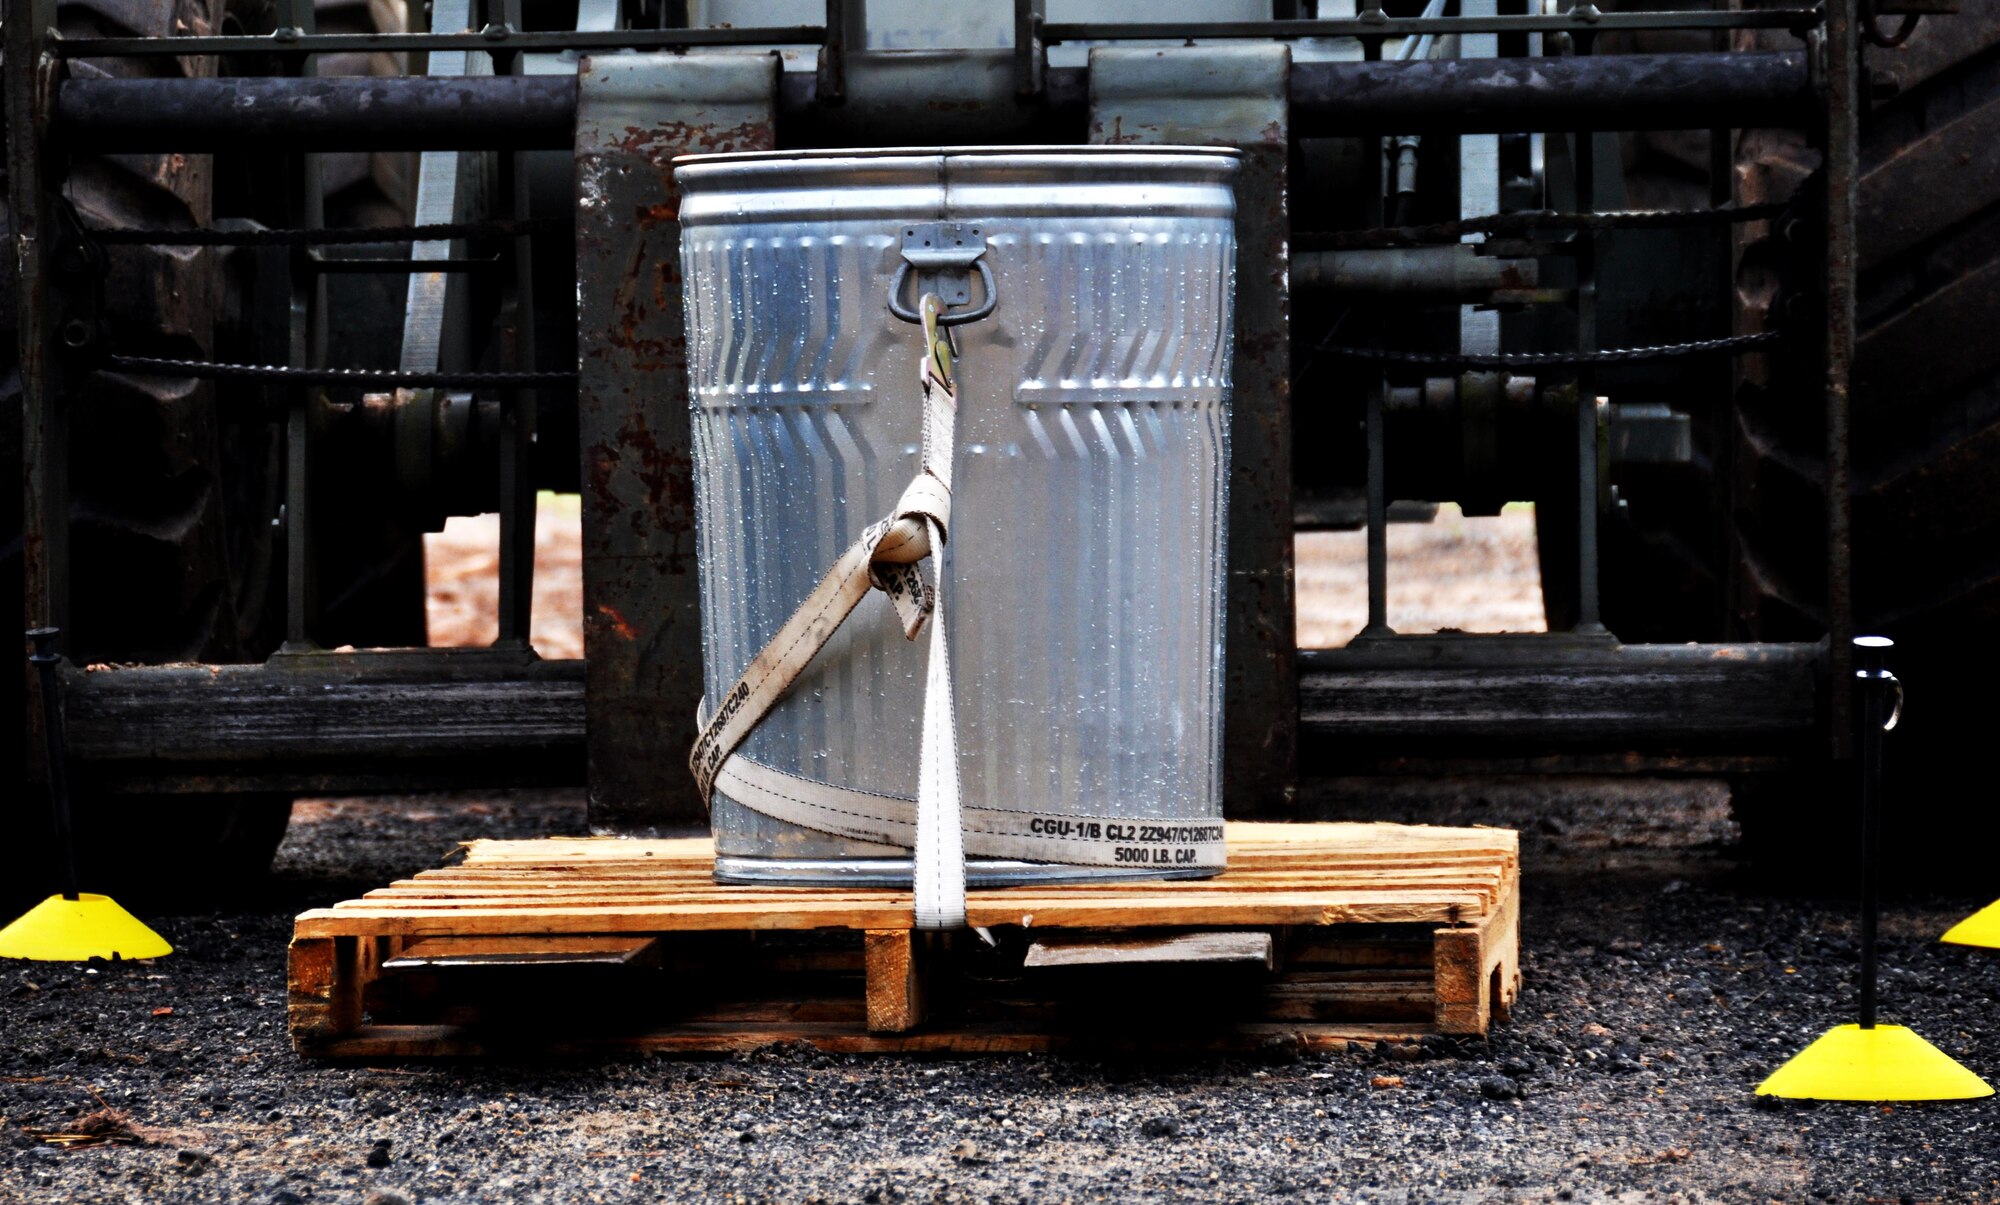 A forklift attempts to lower a trash can full of without spilling any water during Force Support Silver Flag at Dobbins Air Reserve Base, Georgia, March 11, 2015. About 70 Airmen on teams from Peterson Air Force Base, Colorado; the 445th FSS from Wright-Patterson Air Force Base, Ohio; the 908th FSS from Maxwell AFB, Alabama; the 910th FSS from Youngstown ARB, Ohio; the 911th FSS from Pittsburgh, Pennsylvania; and the 934th FSS from Minneapolis – St. Paul, Minnesota competed in FS Silver Flag.  (U.S. Air Force photo/Senior Airman Daniel Phelps)